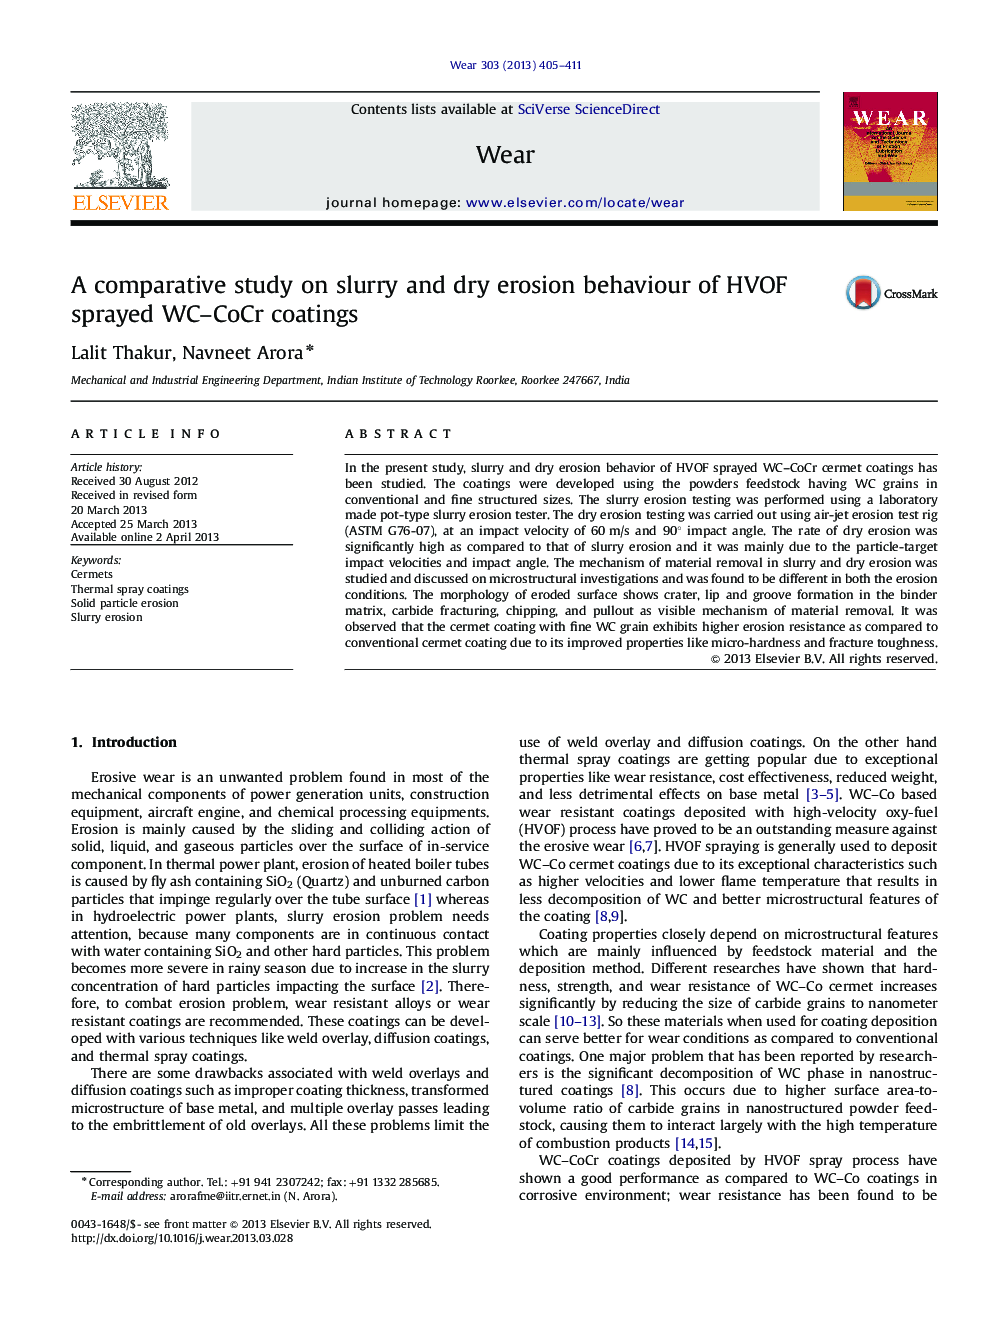 A comparative study on slurry and dry erosion behaviour of HVOF sprayed WC-CoCr coatings